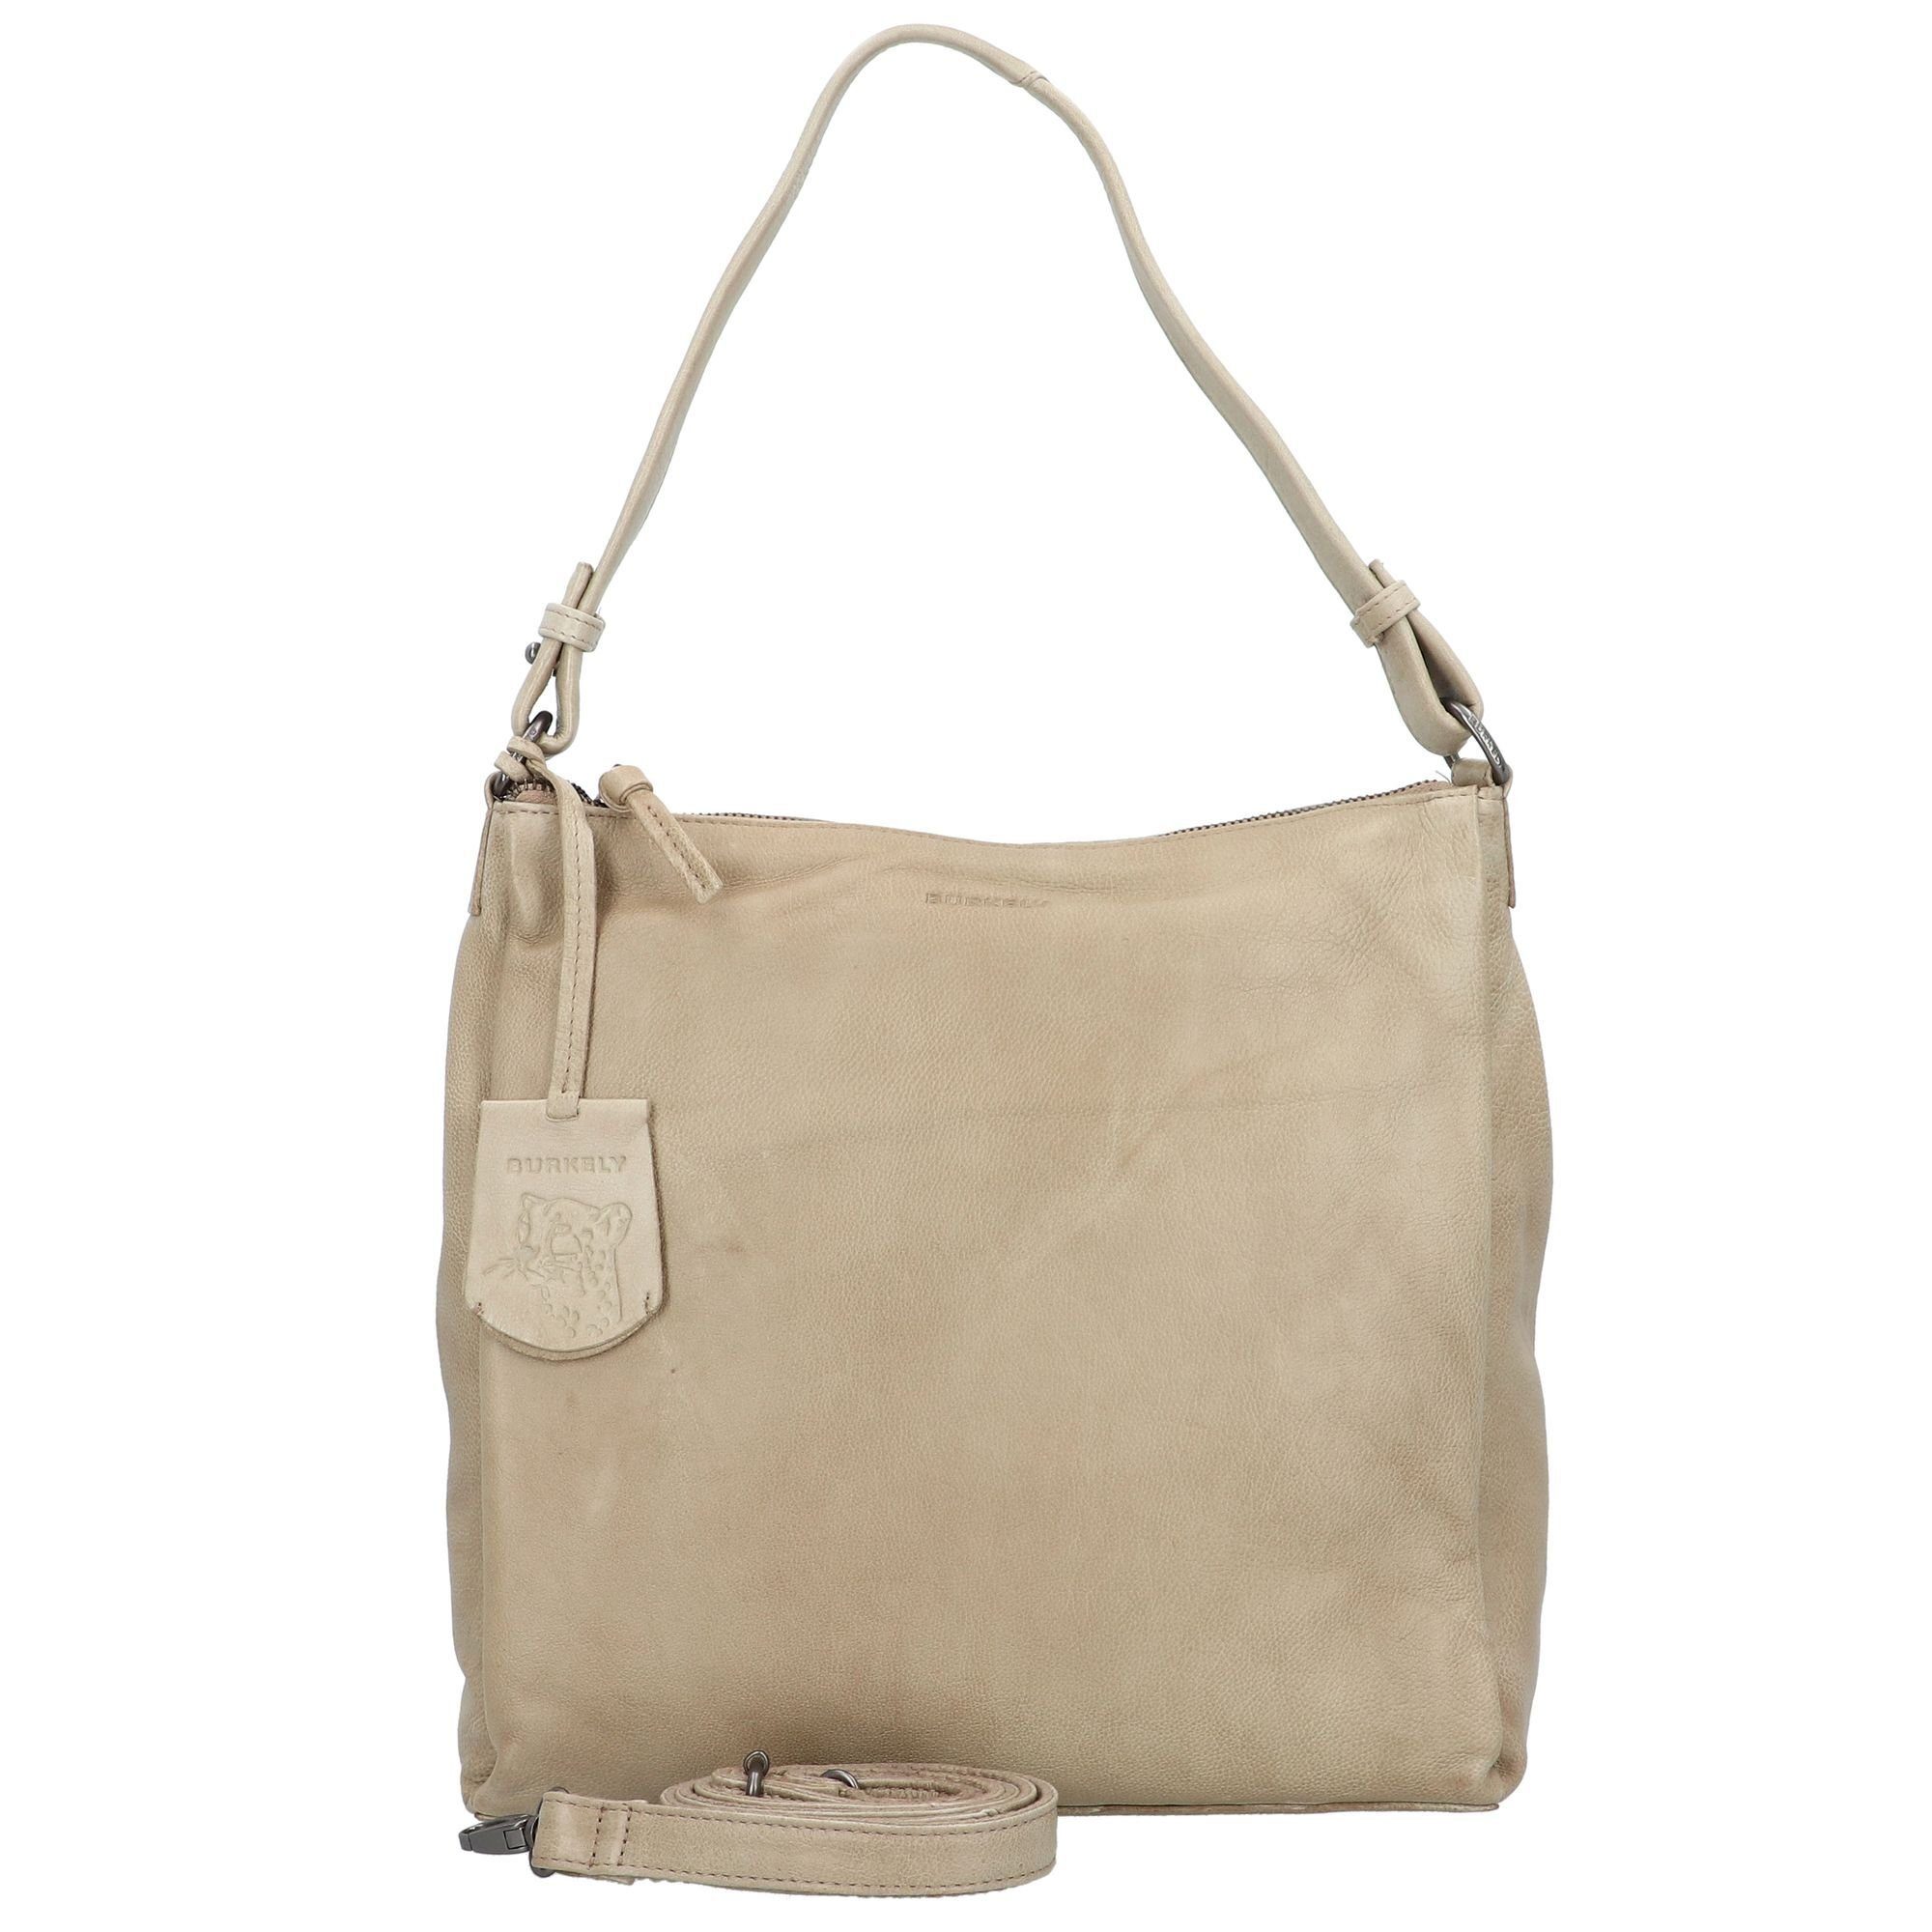 Leder Schultertasche Jolie, taupe Just Burkely truffle